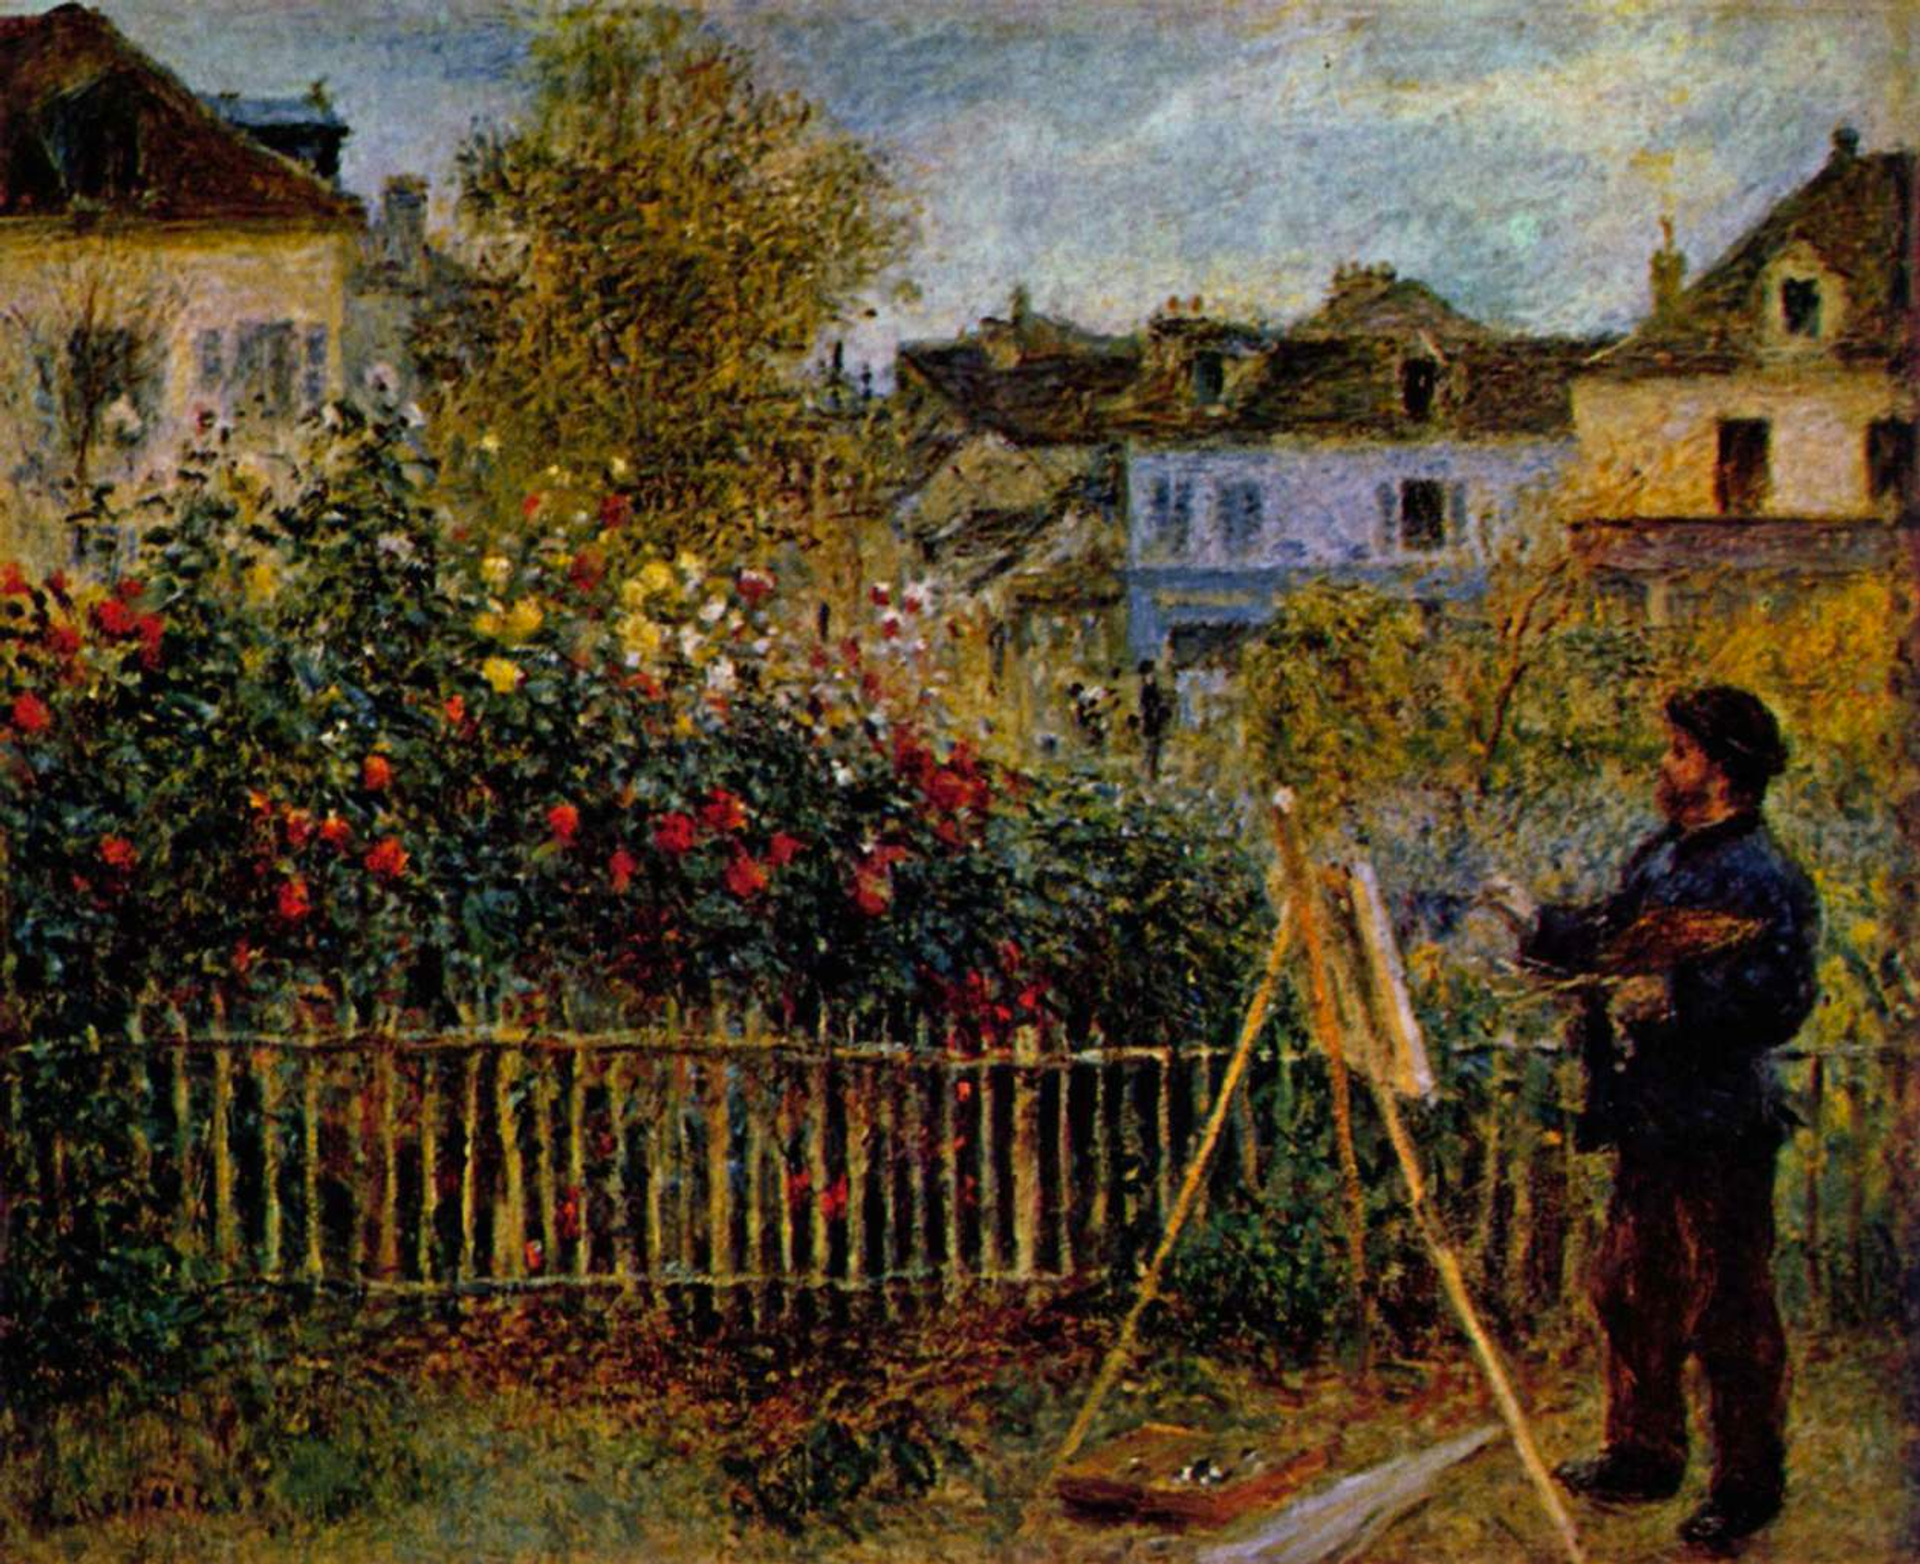 This painting by Renoir shows Monet painting outdoors in his garden. The artist is shown working on a painting on an easel, in the midst of flowers and houses.